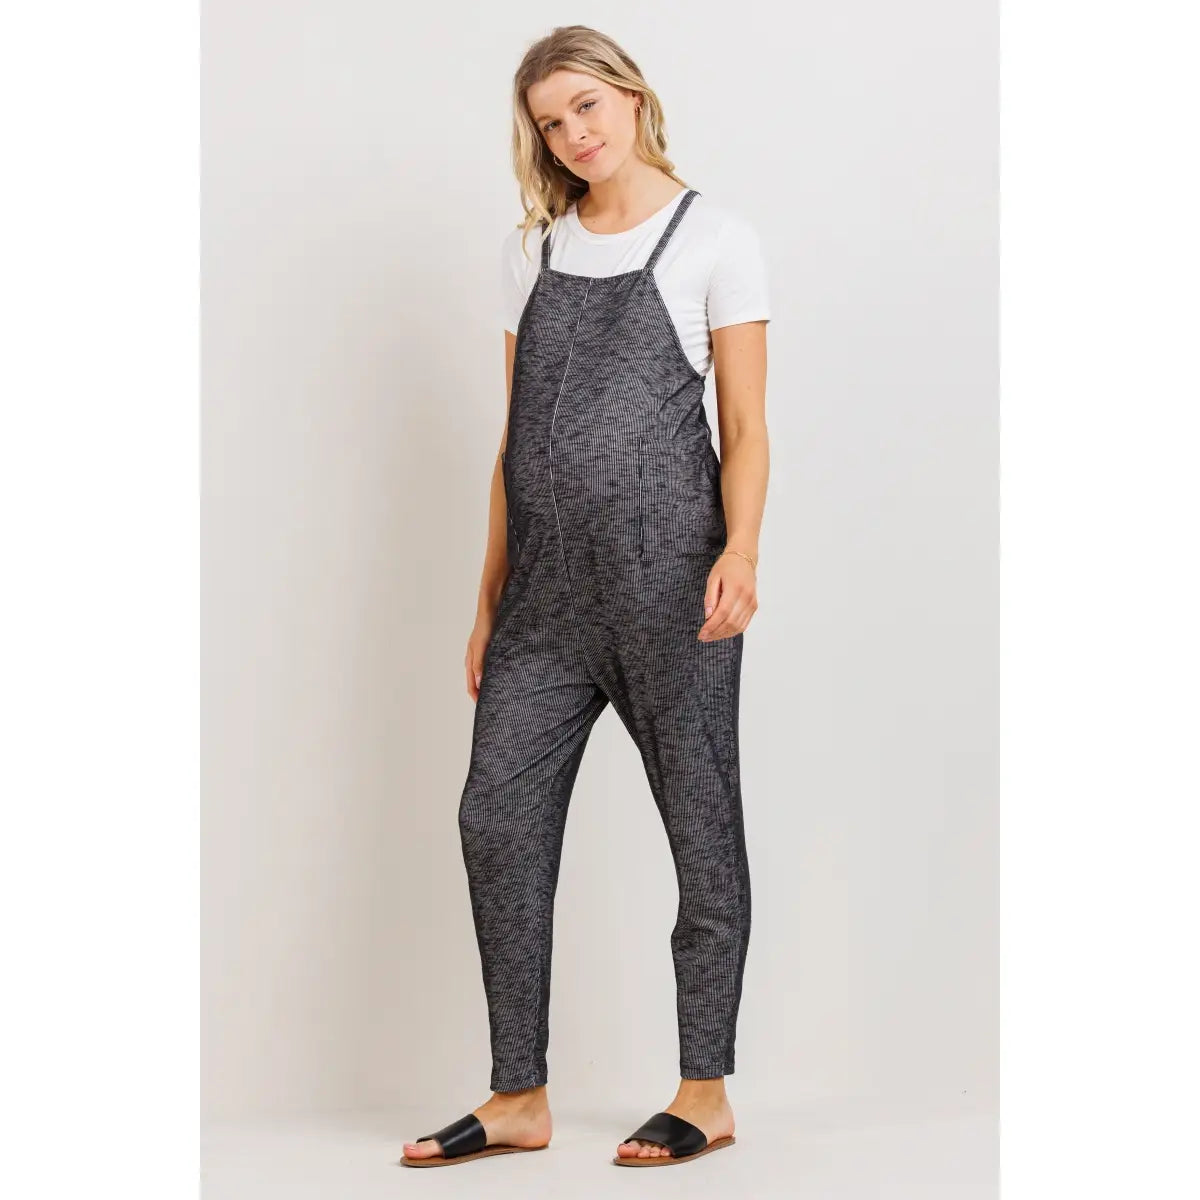 Two Tone Loose Fit Maternity Jumpsuit